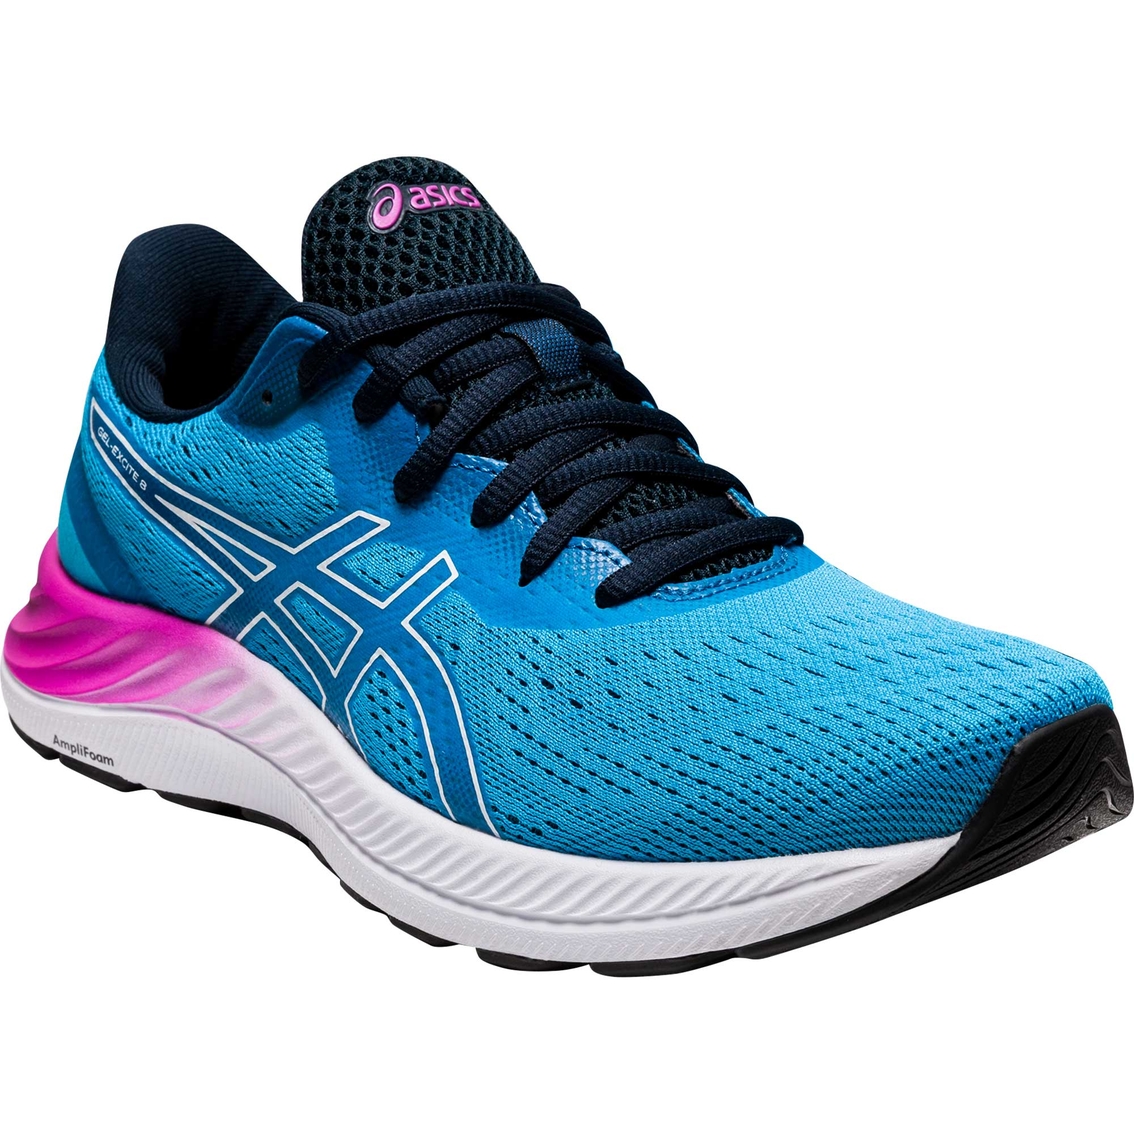 Asics Women\'s Women\'s 8 Shoes The Running Exchange Shop | Athletic Shoes | Shoes Excite Gel |